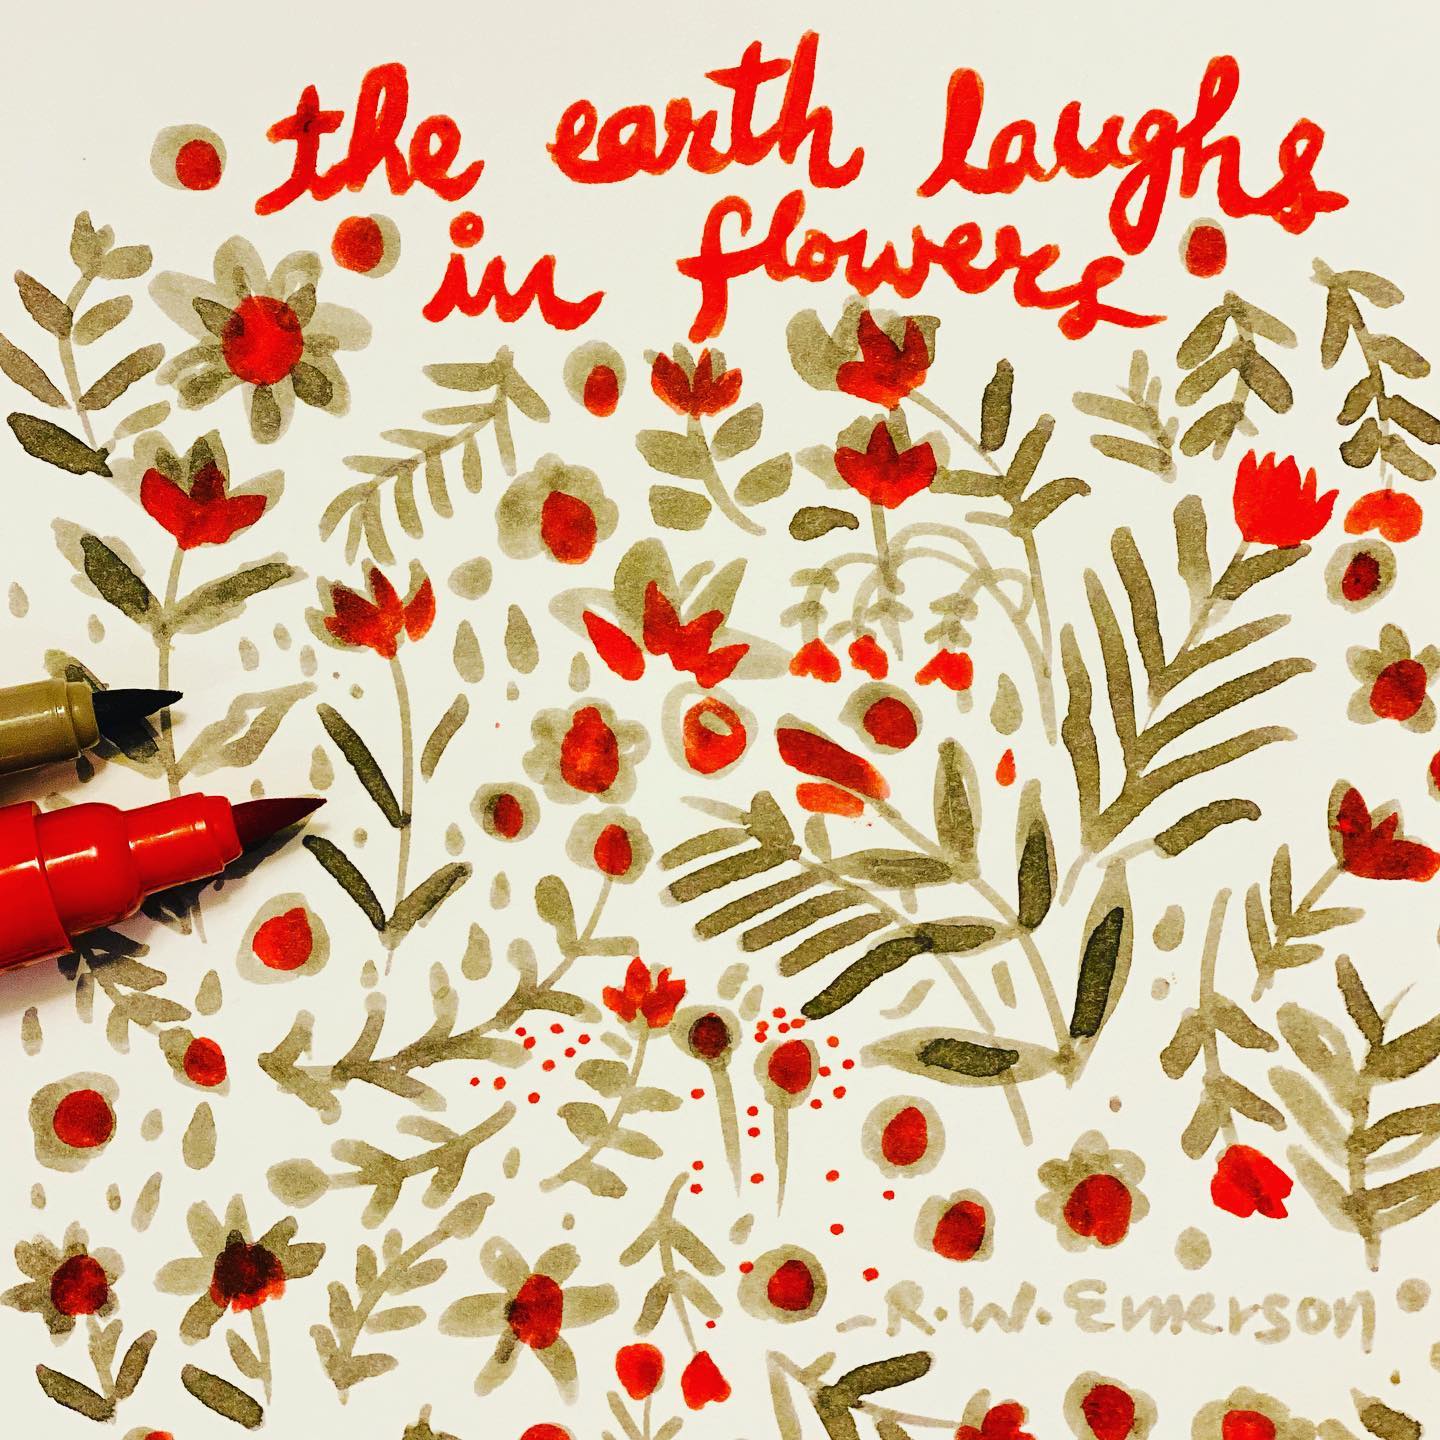 The earth laughs in flowers
~ R.W. Emerson